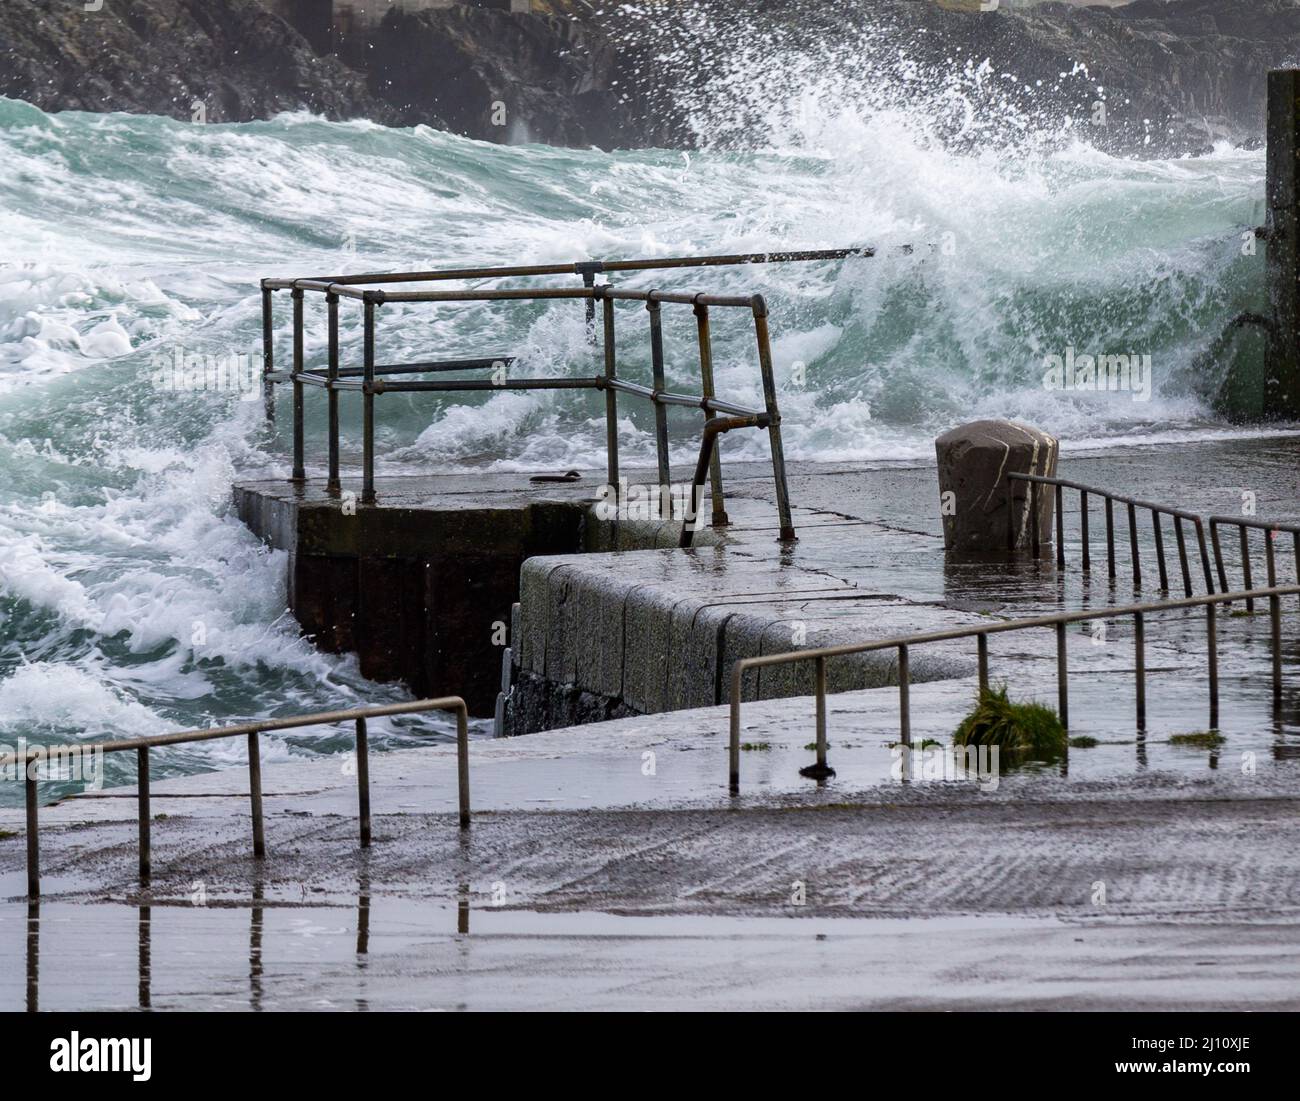 Atlantic storm waves breaking over pier safety barrier hand rails Stock Photo